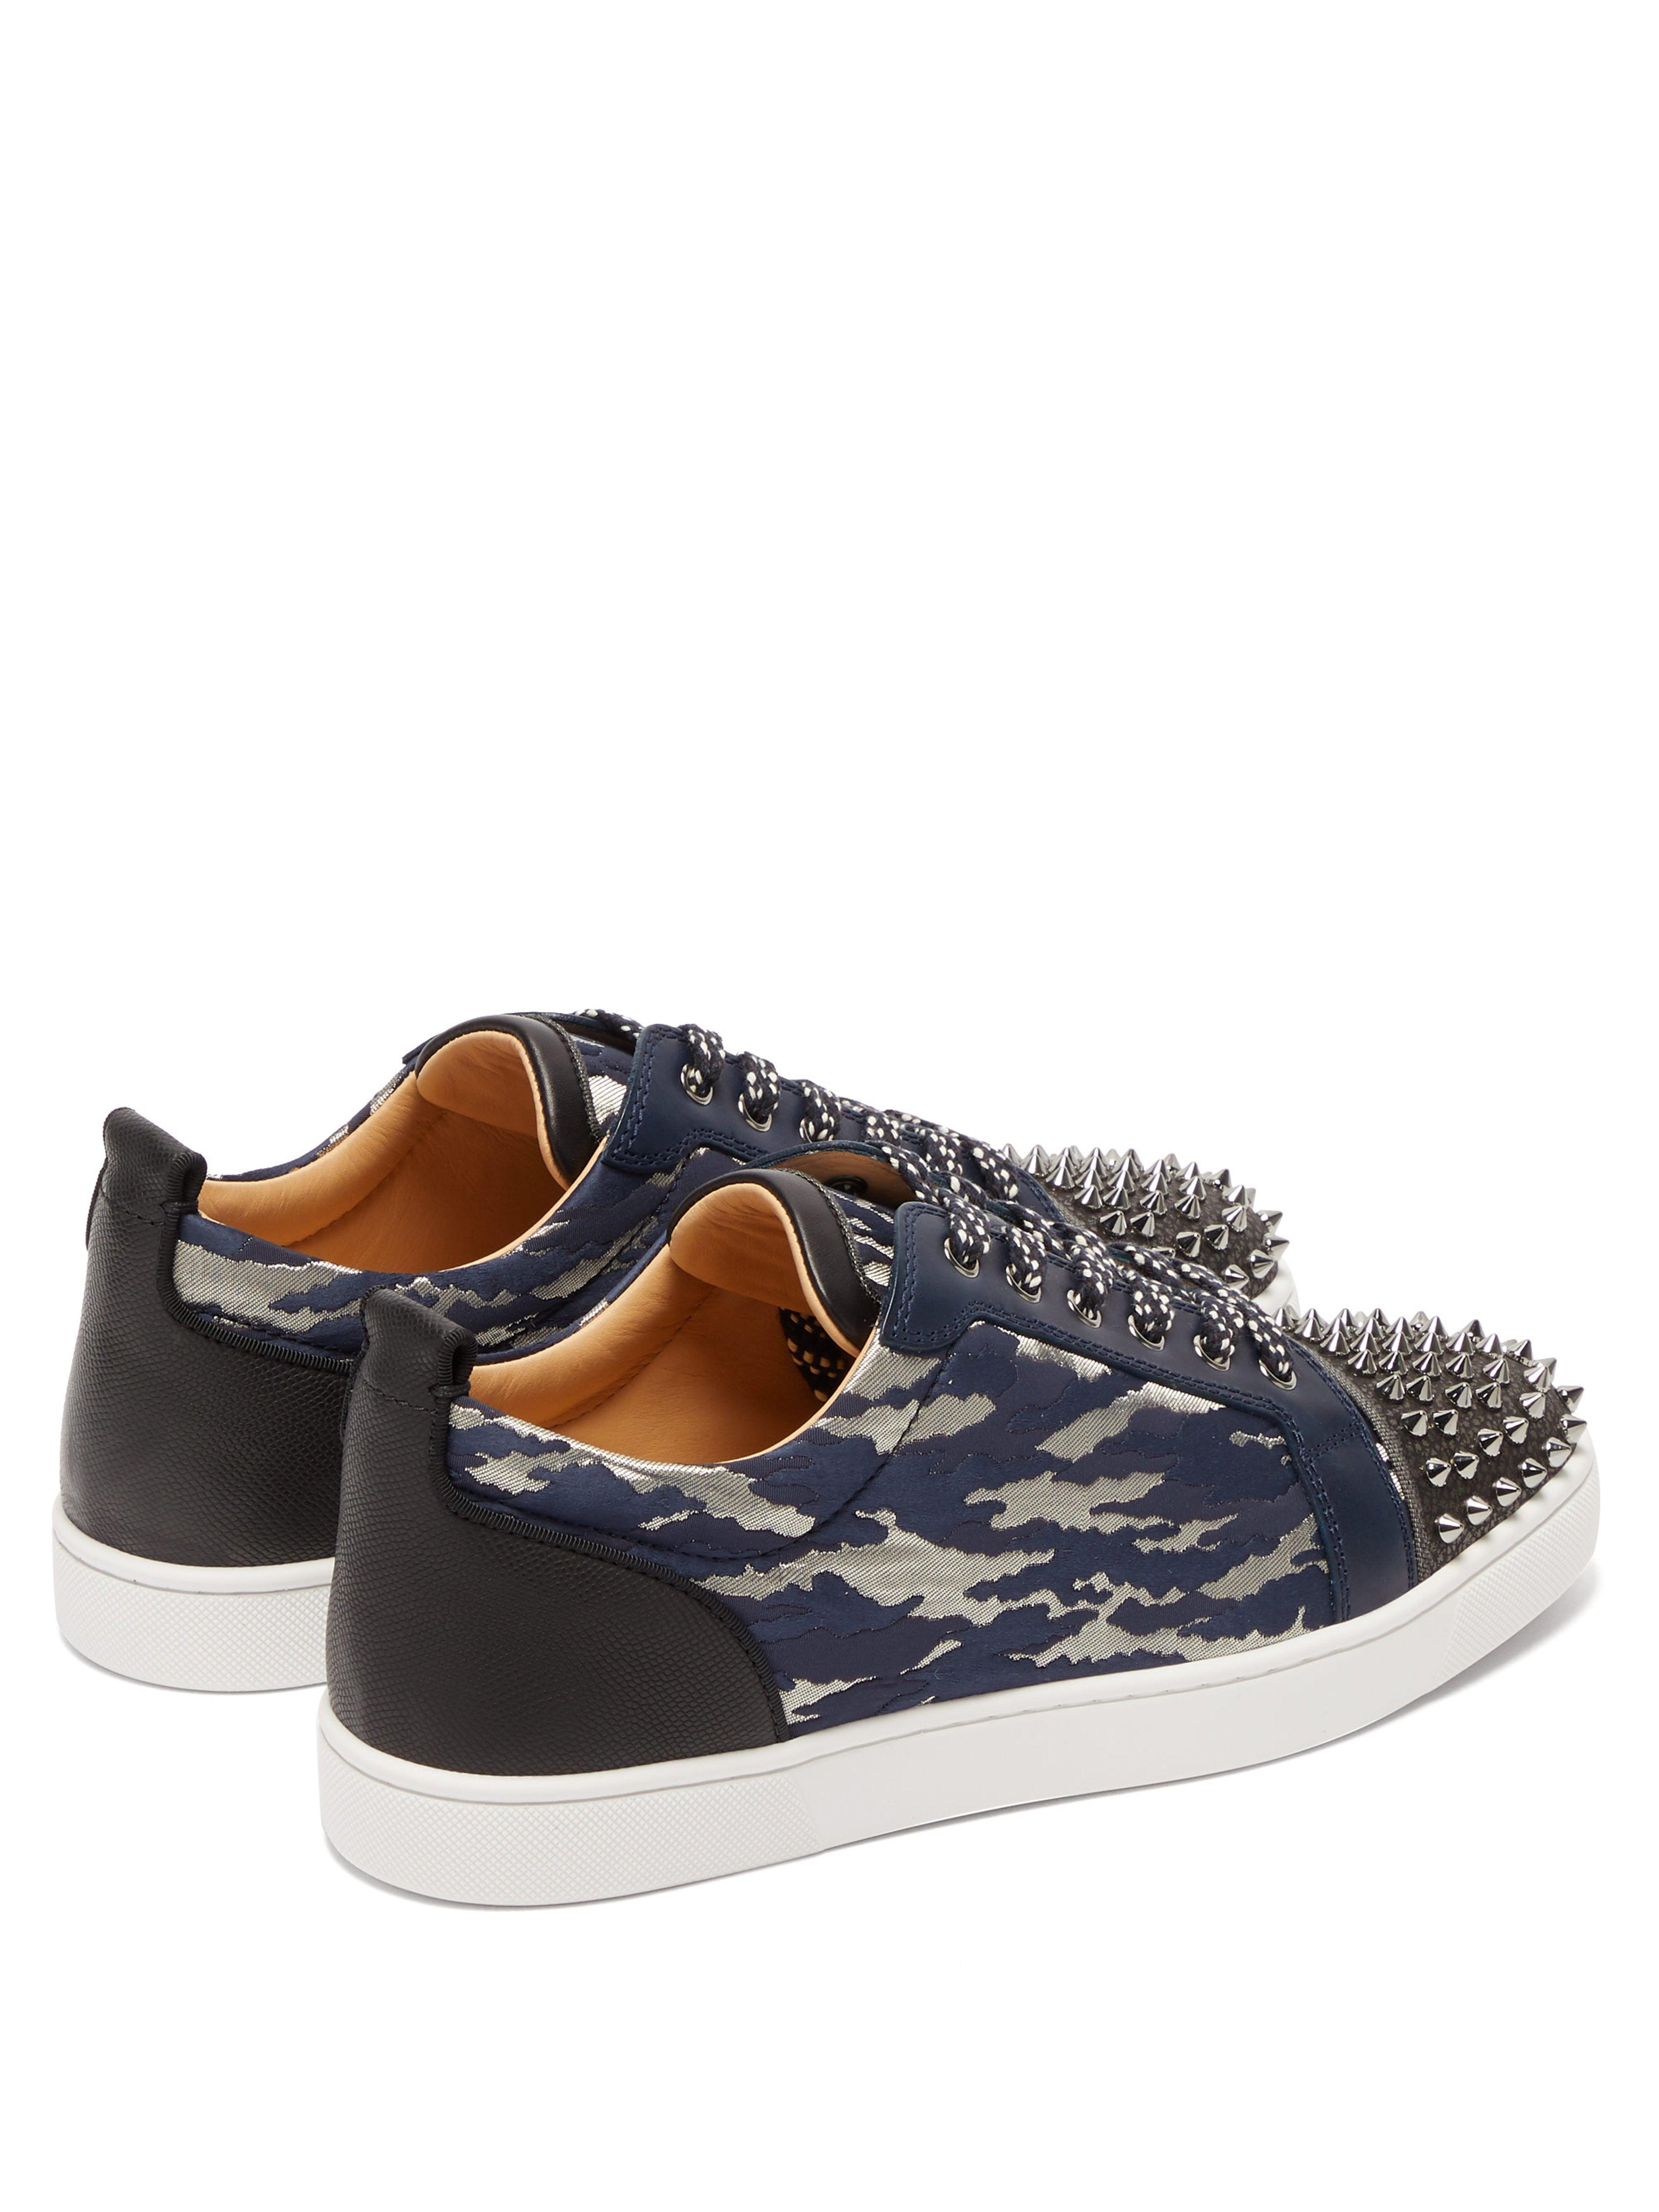 Sightseeing Rundt og rundt reb Christian Louboutin Leather Louis Junior Spikes Orlato Jacquard Camouloubi  Trainers in Navy (Blue) for Men - Lyst